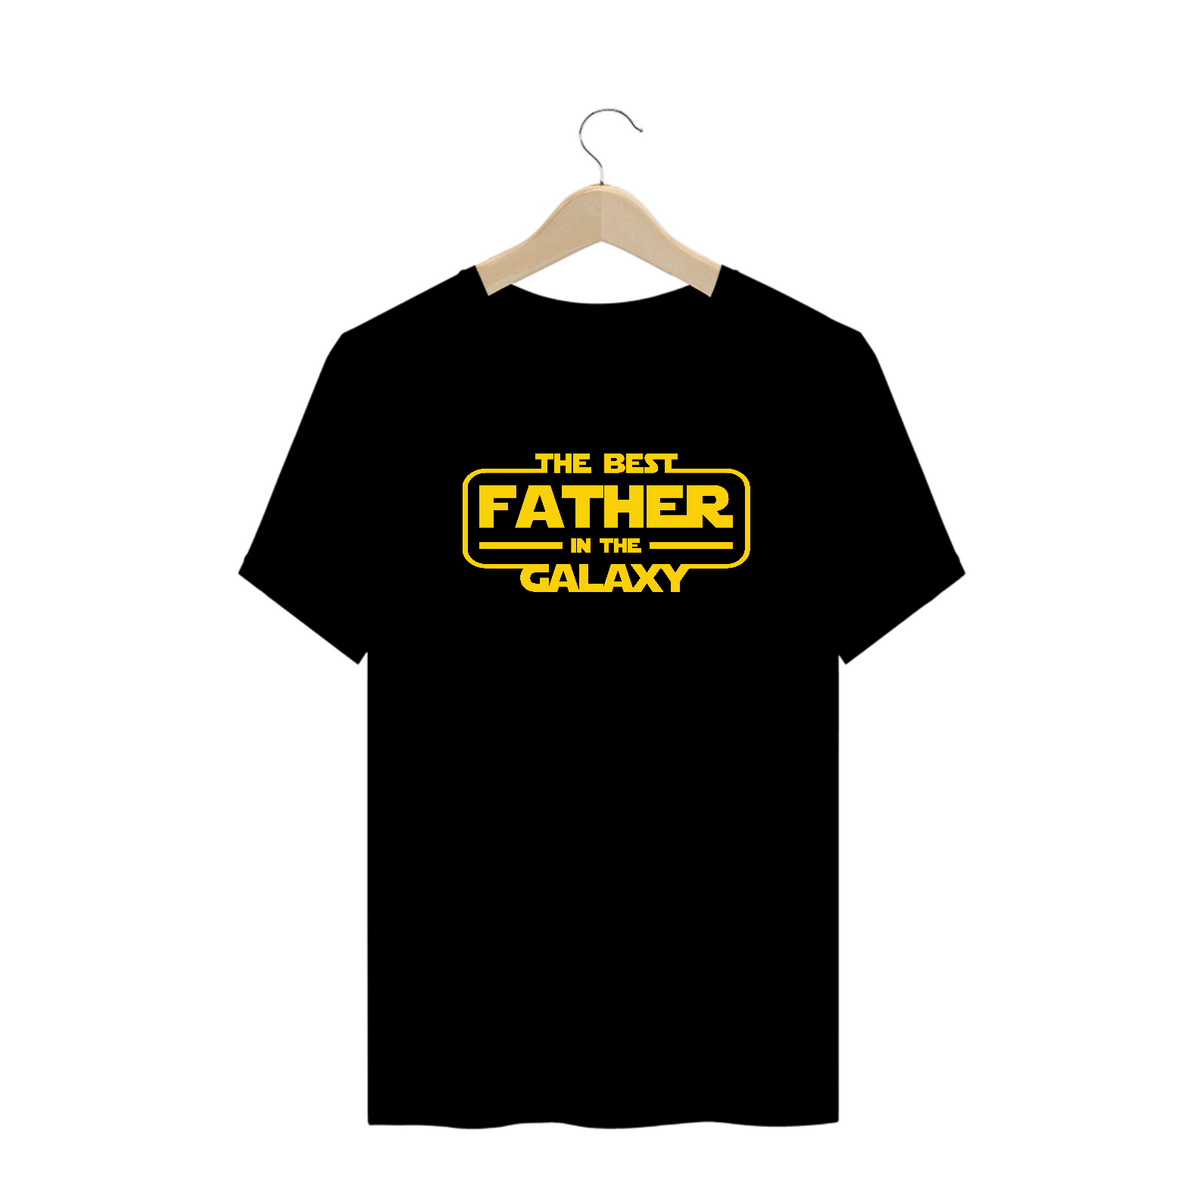 Nome do produto: Camiseta Plus Size Geek The Best Father in Galaxy